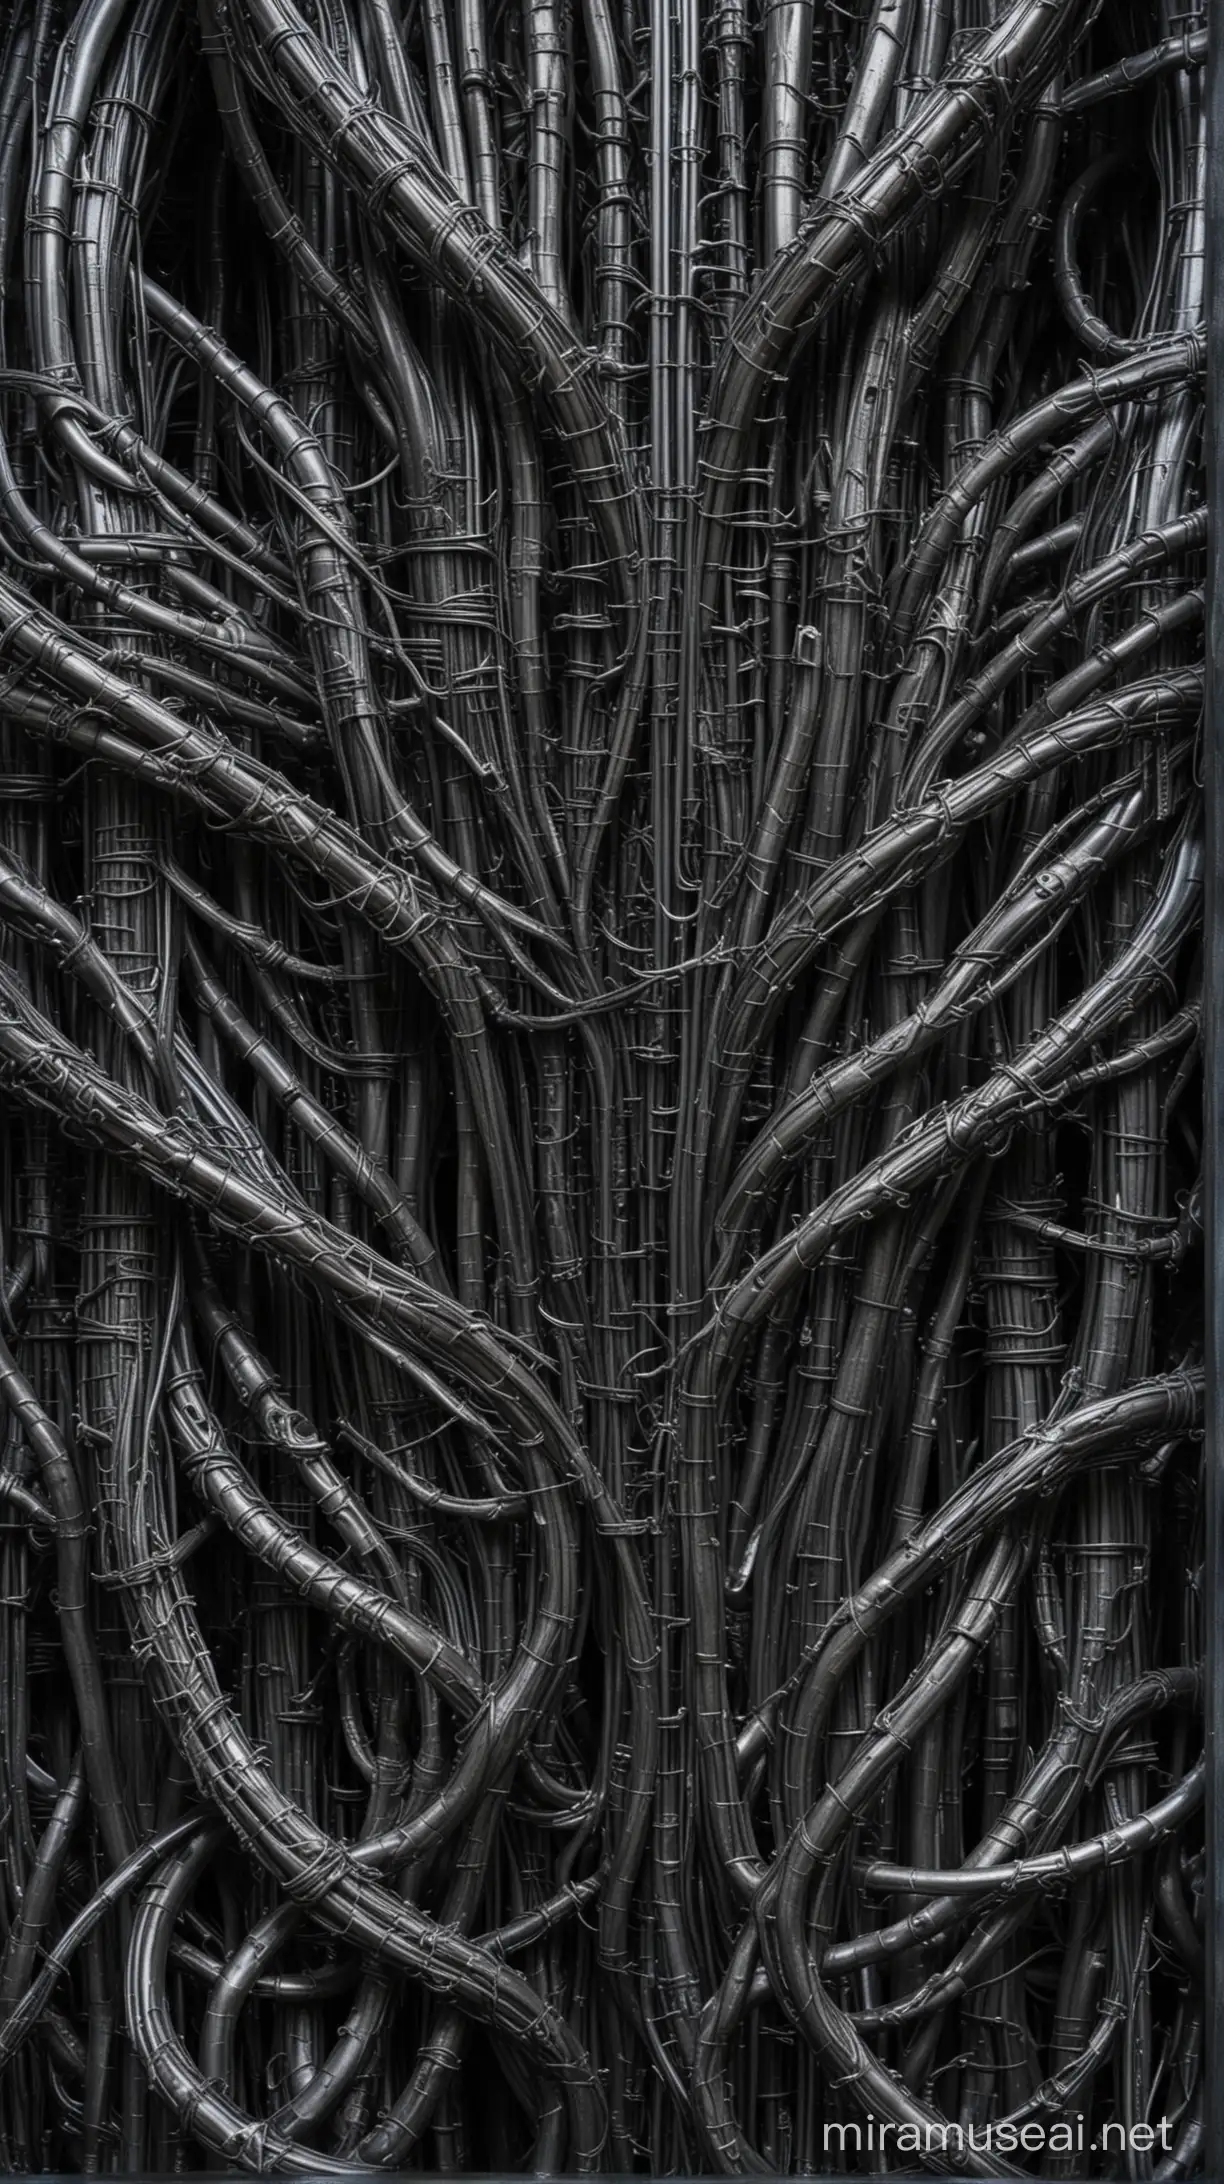 a bunch of intertwined wires in giger style